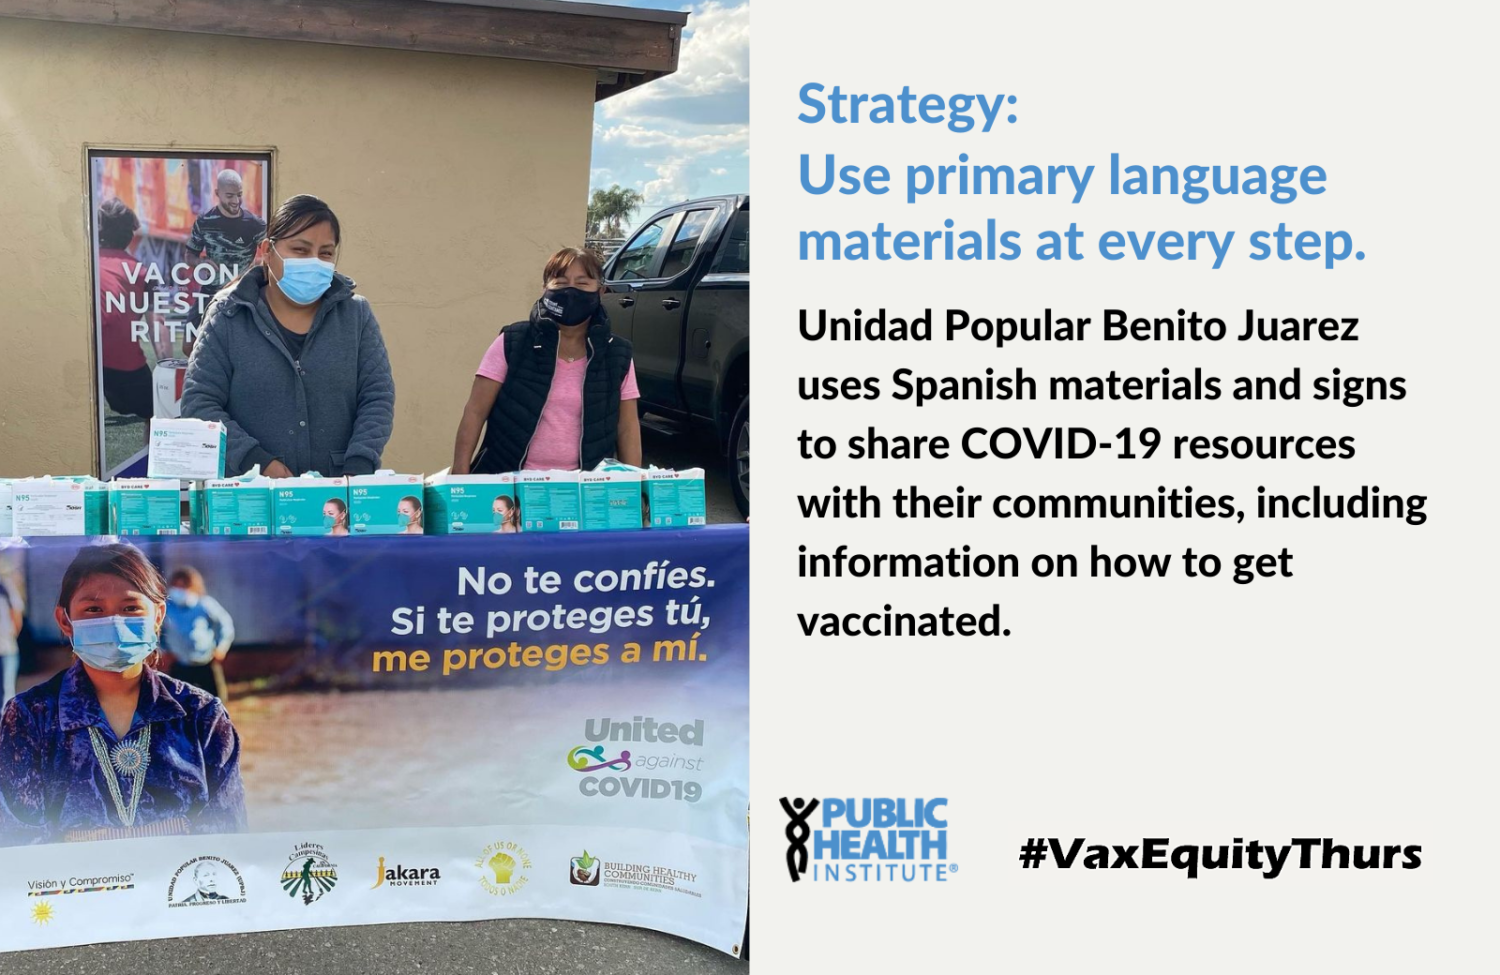 Strategy: Use primary language materials at every step: Unidad Popular Benito Juarez uses Spanish materials and signs to share COVID-19 resources with their communities, including information on how to get vaccinated.